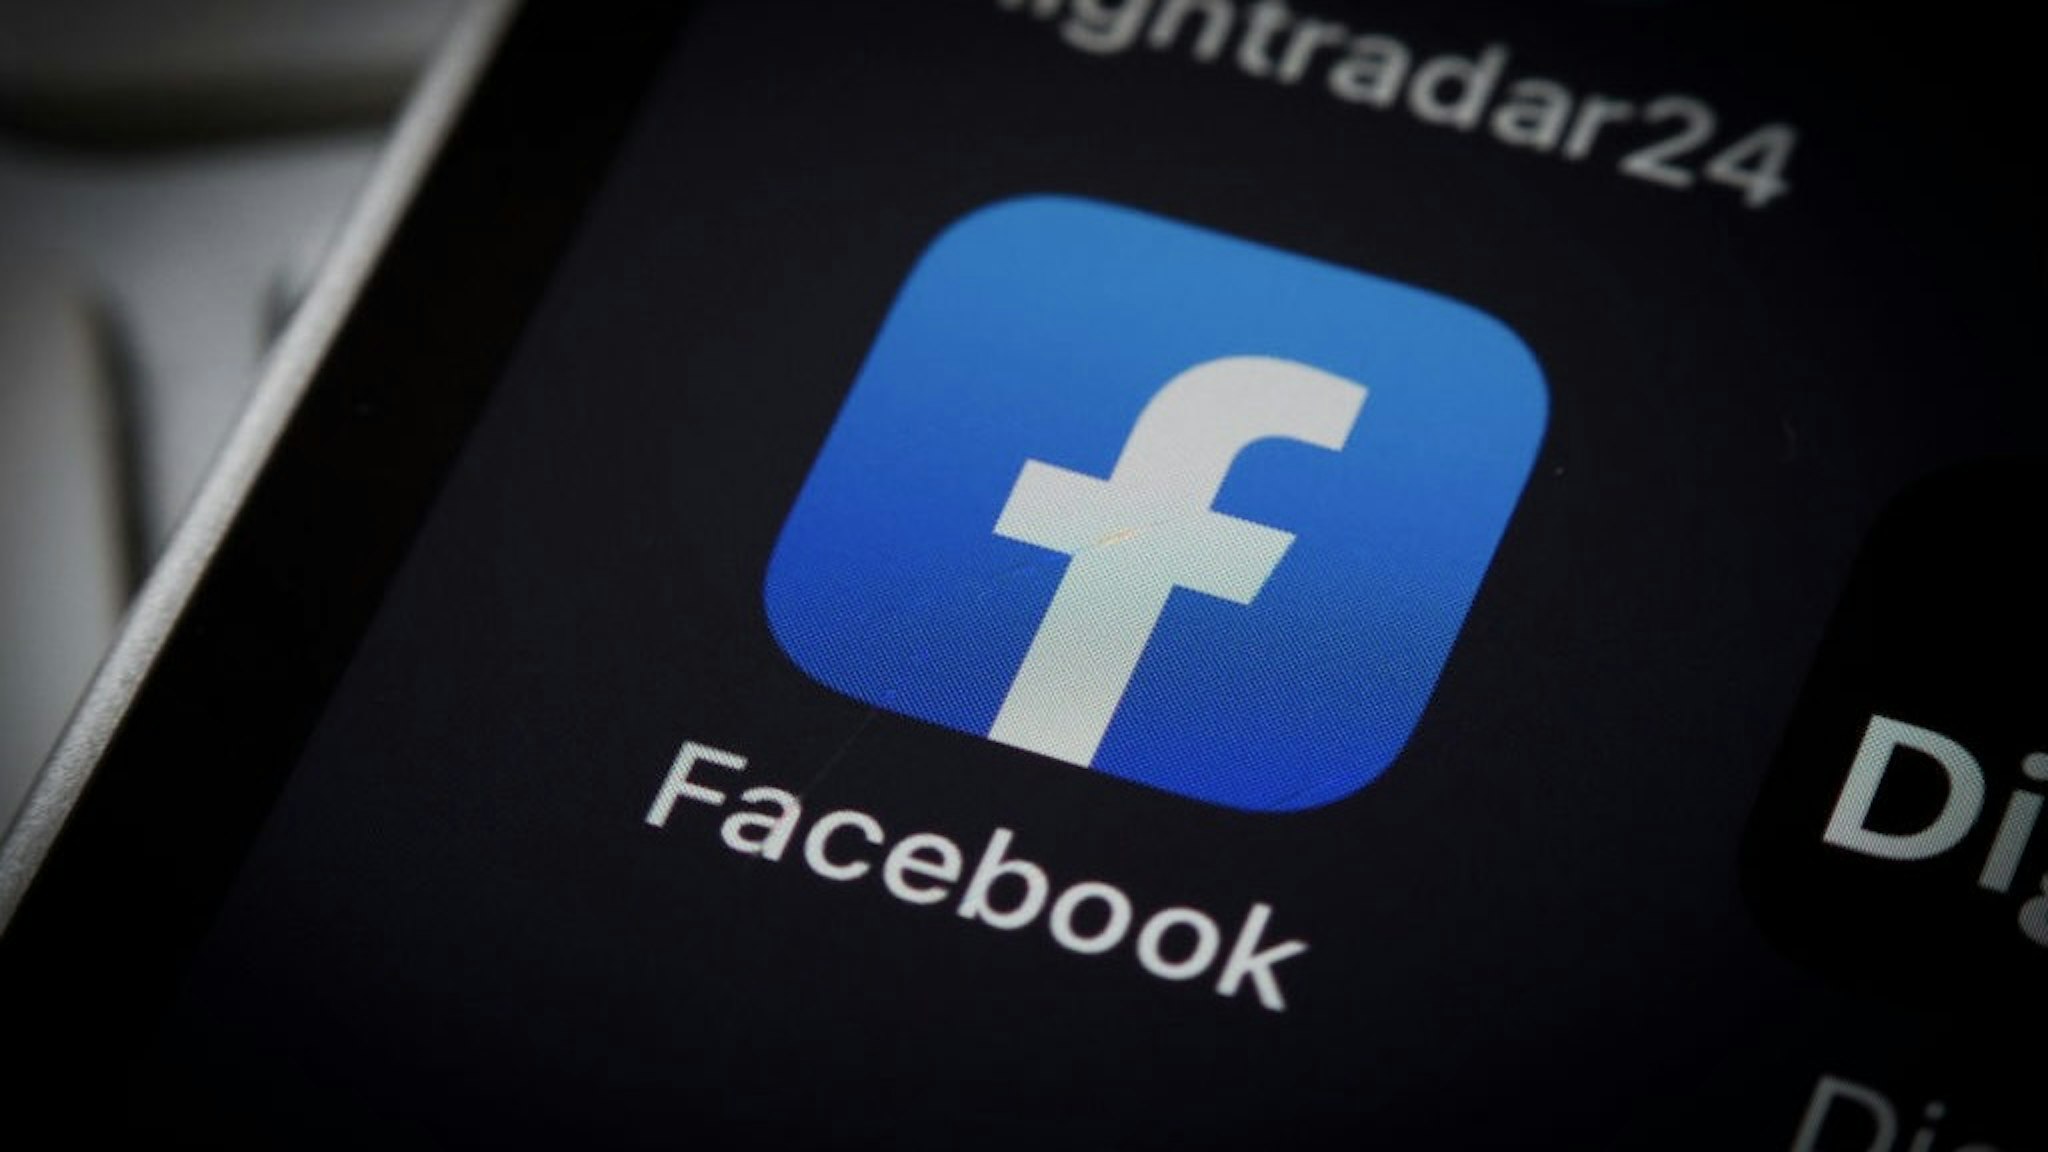 Social Media Illustrations The Facebook logo is seen on an iPhone mobile device in this illustration photo in Warsaw, Poland on 12 October, 2022. (Photo by STR/NurPhoto via Getty Images) NurPhoto / Contributor